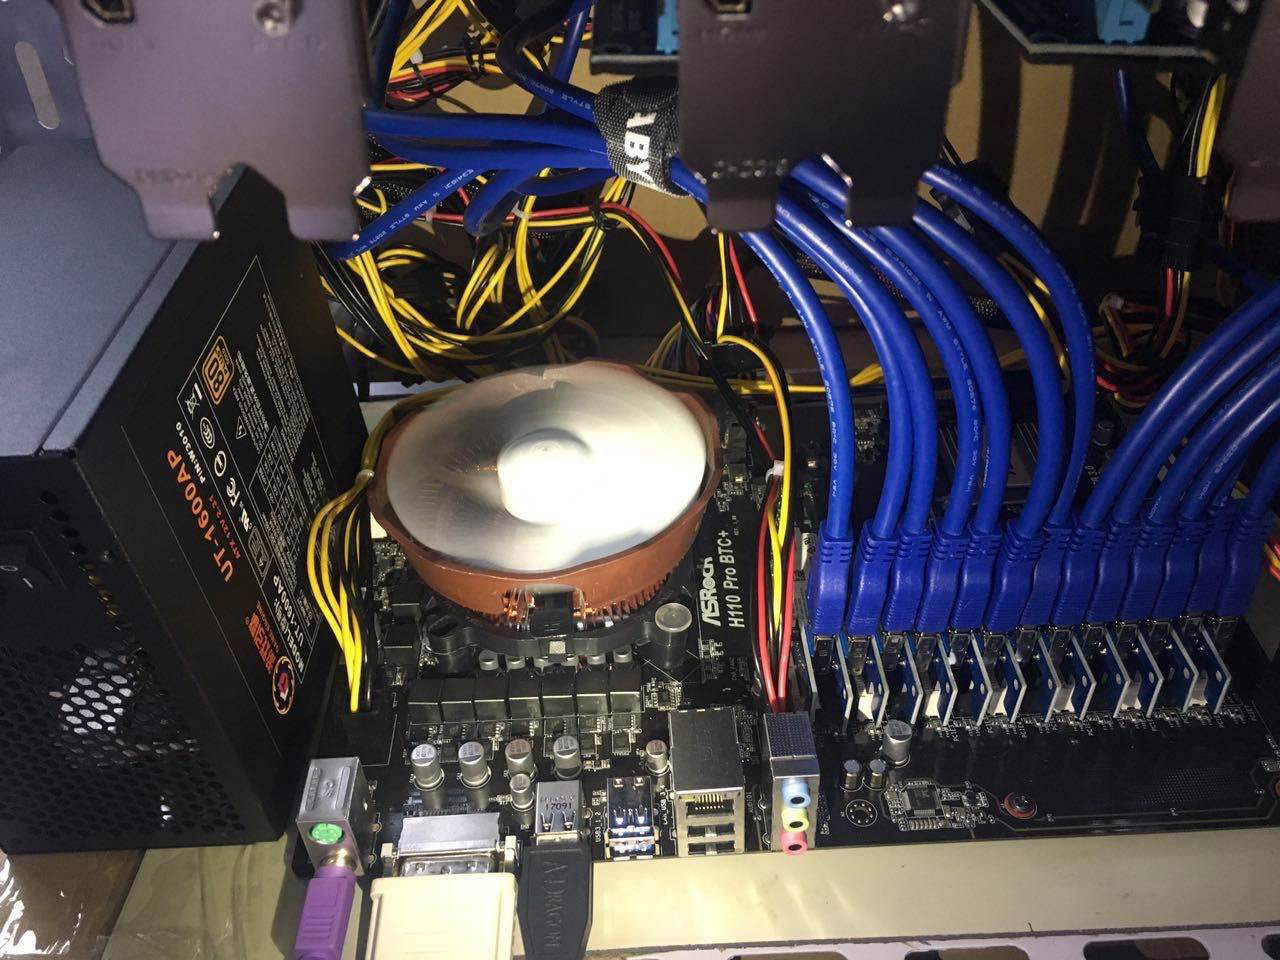 ASRockMine With ASRock H Pro BTC+ Supports up to 13 GPU Mining